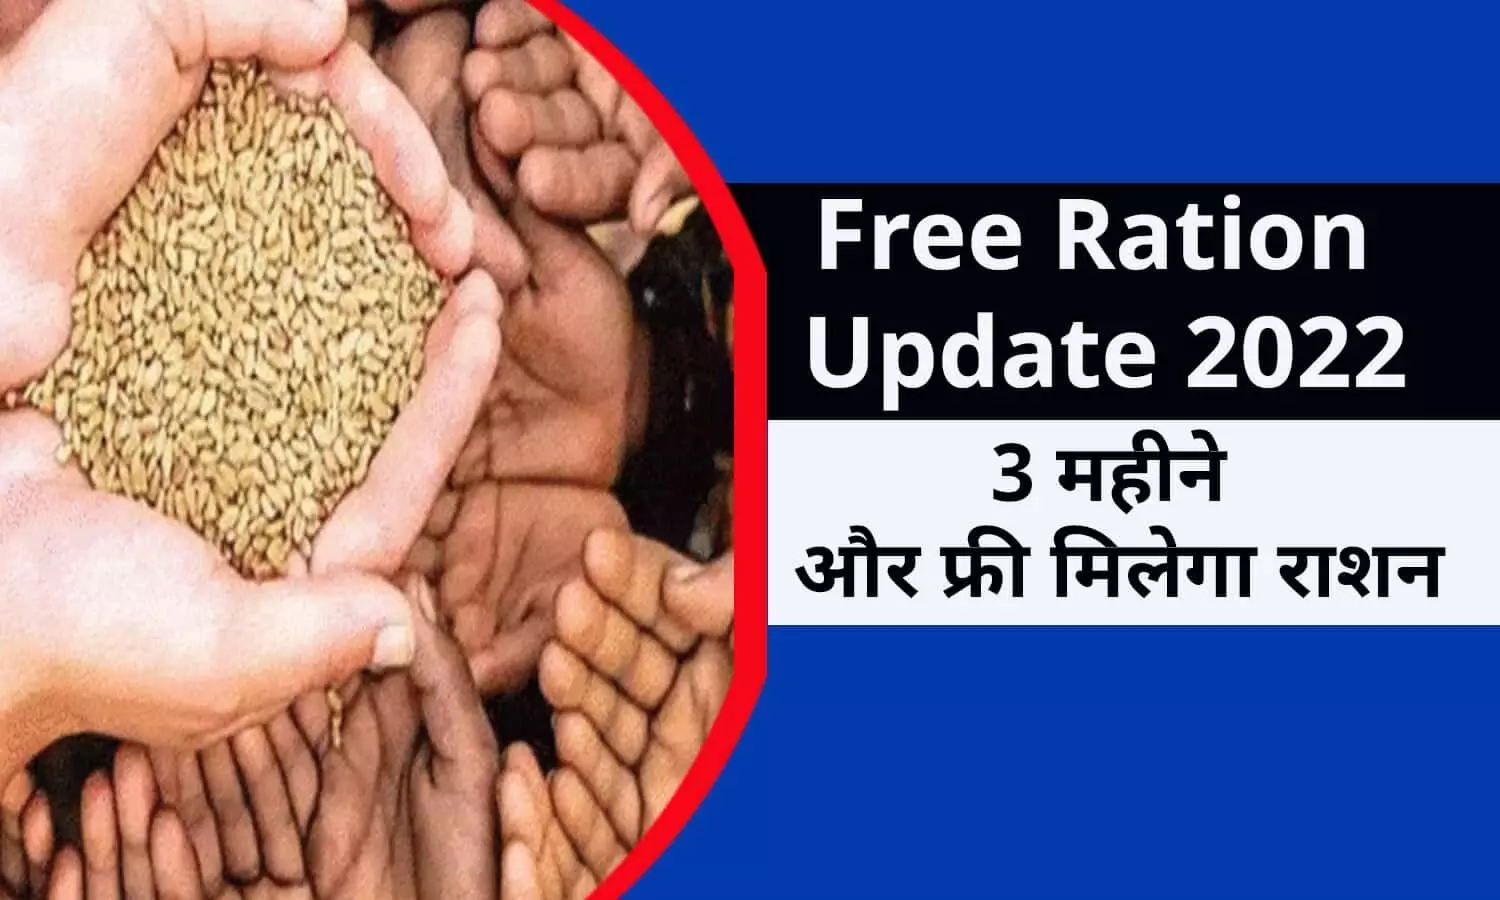 Free Ration Update 2022